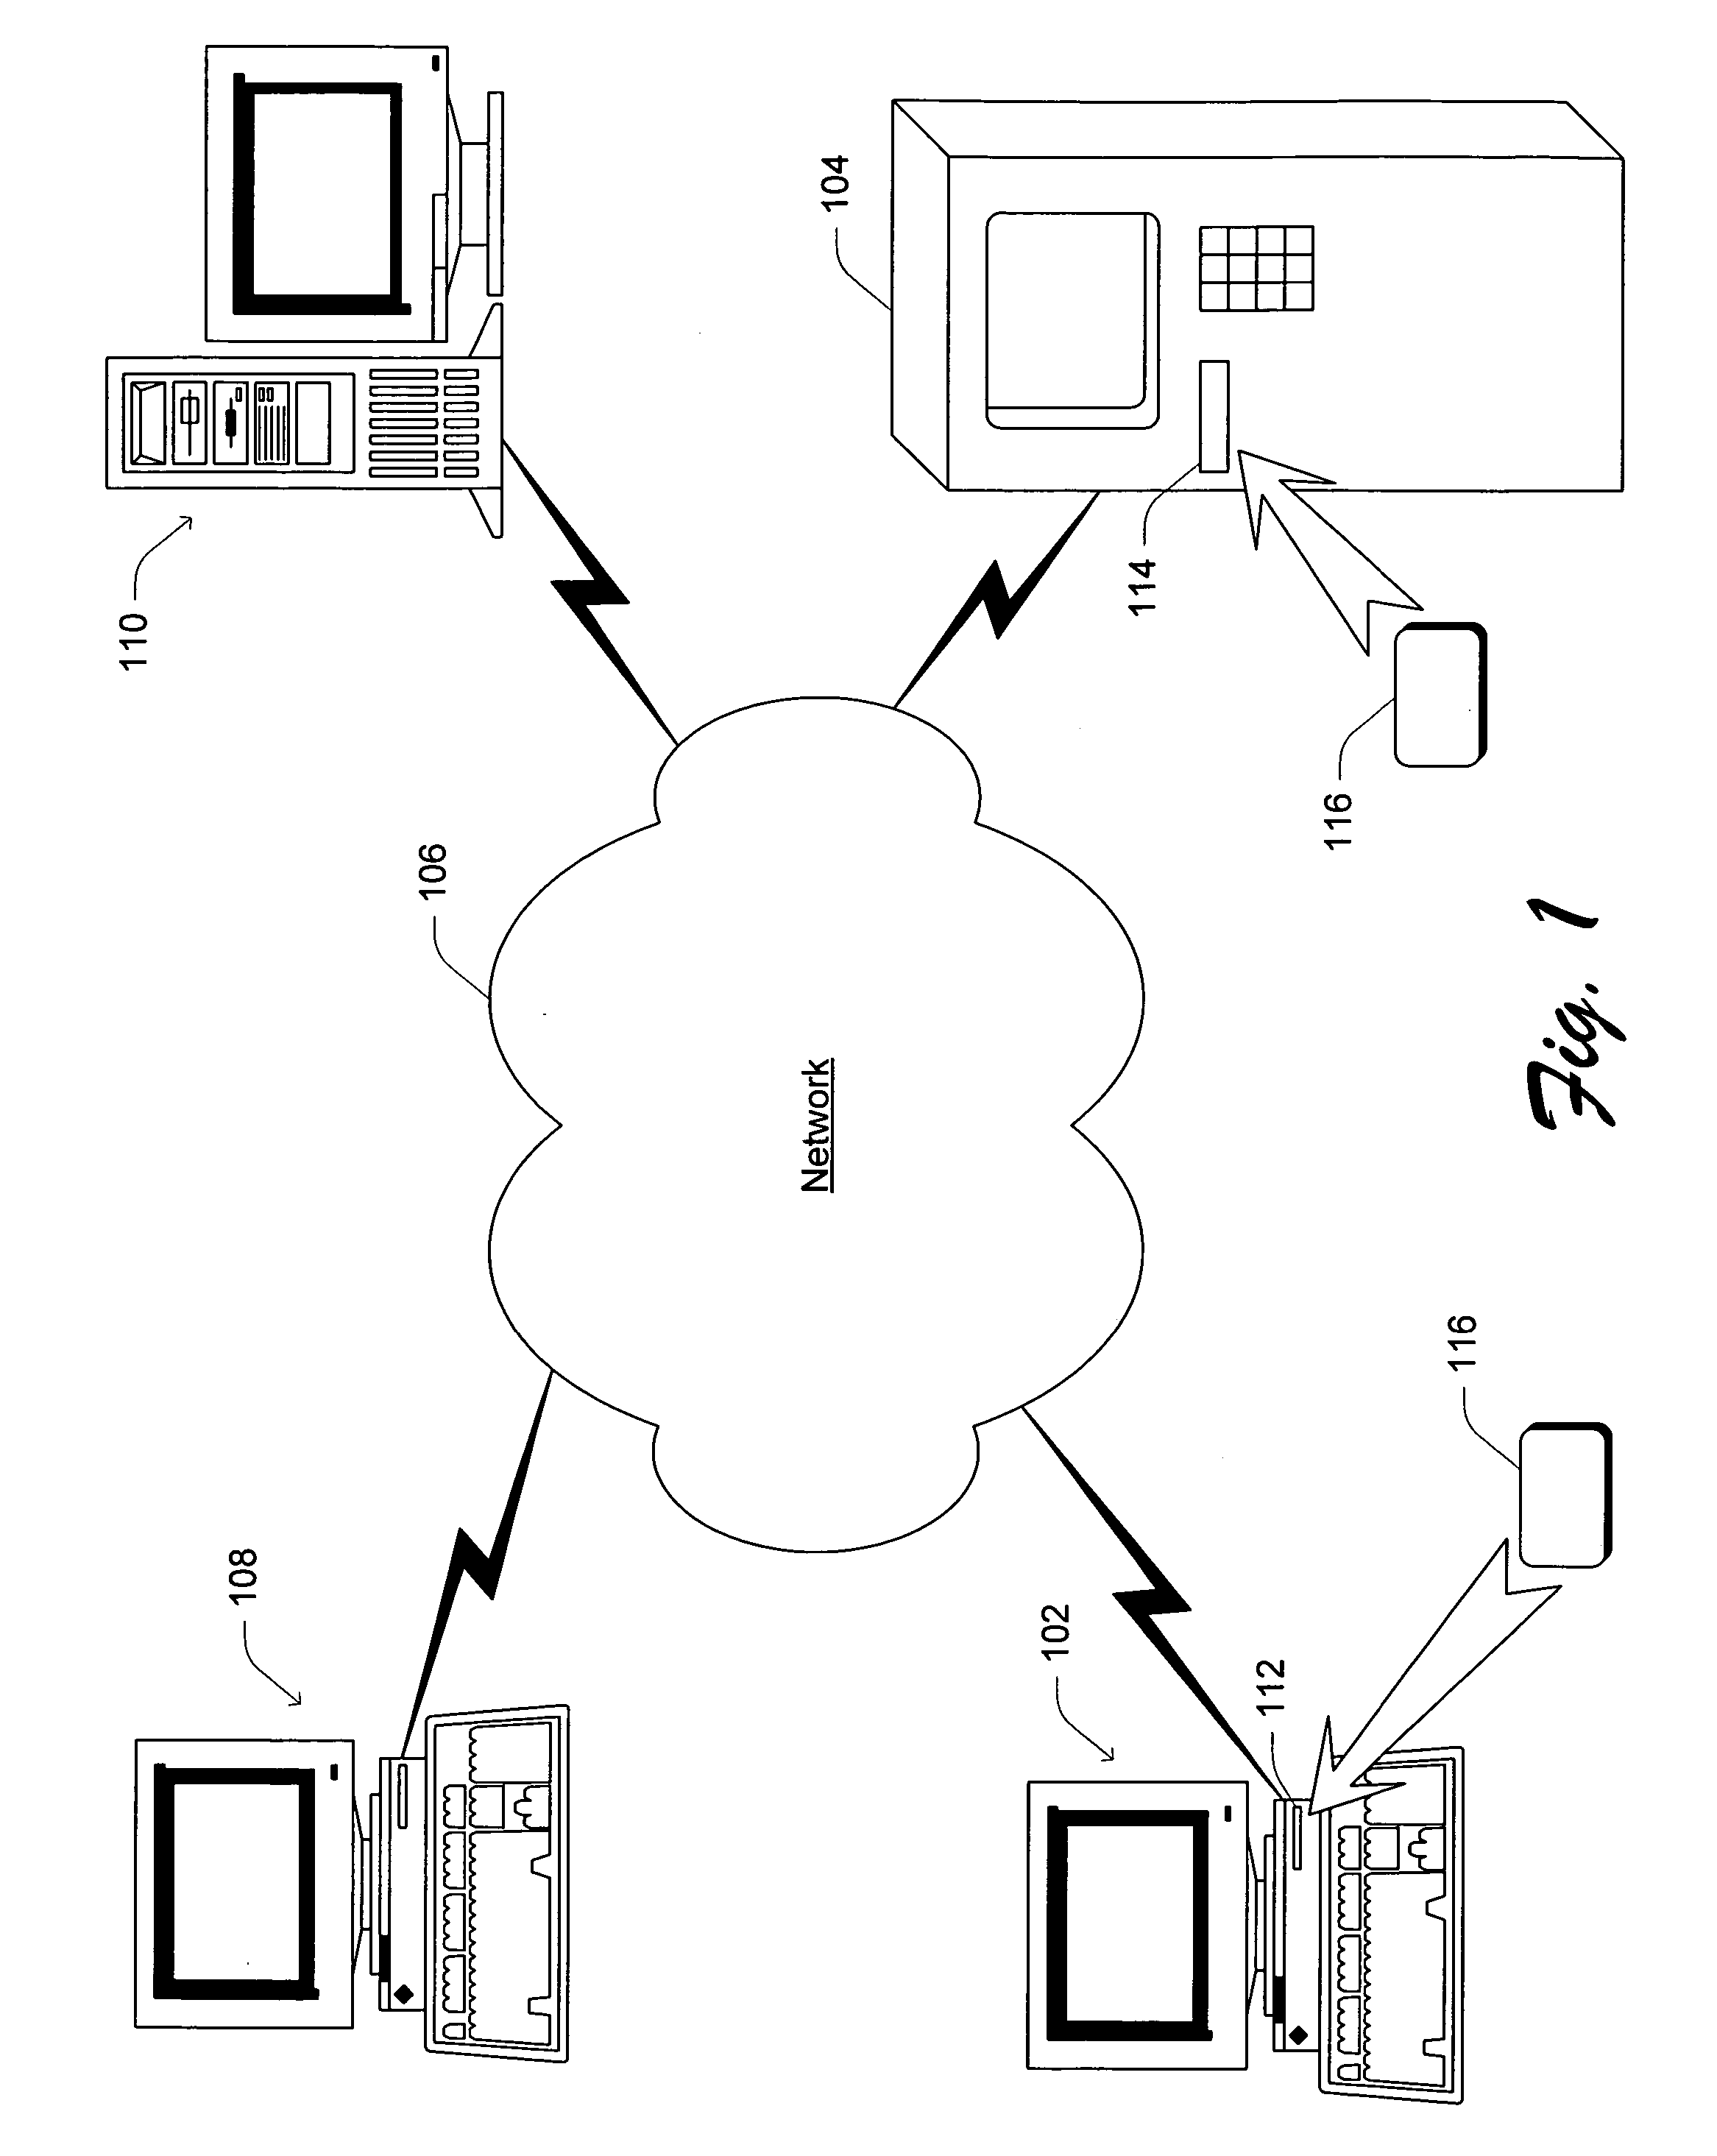 Method and apparatus for authenticating an open system application to a portable IC device